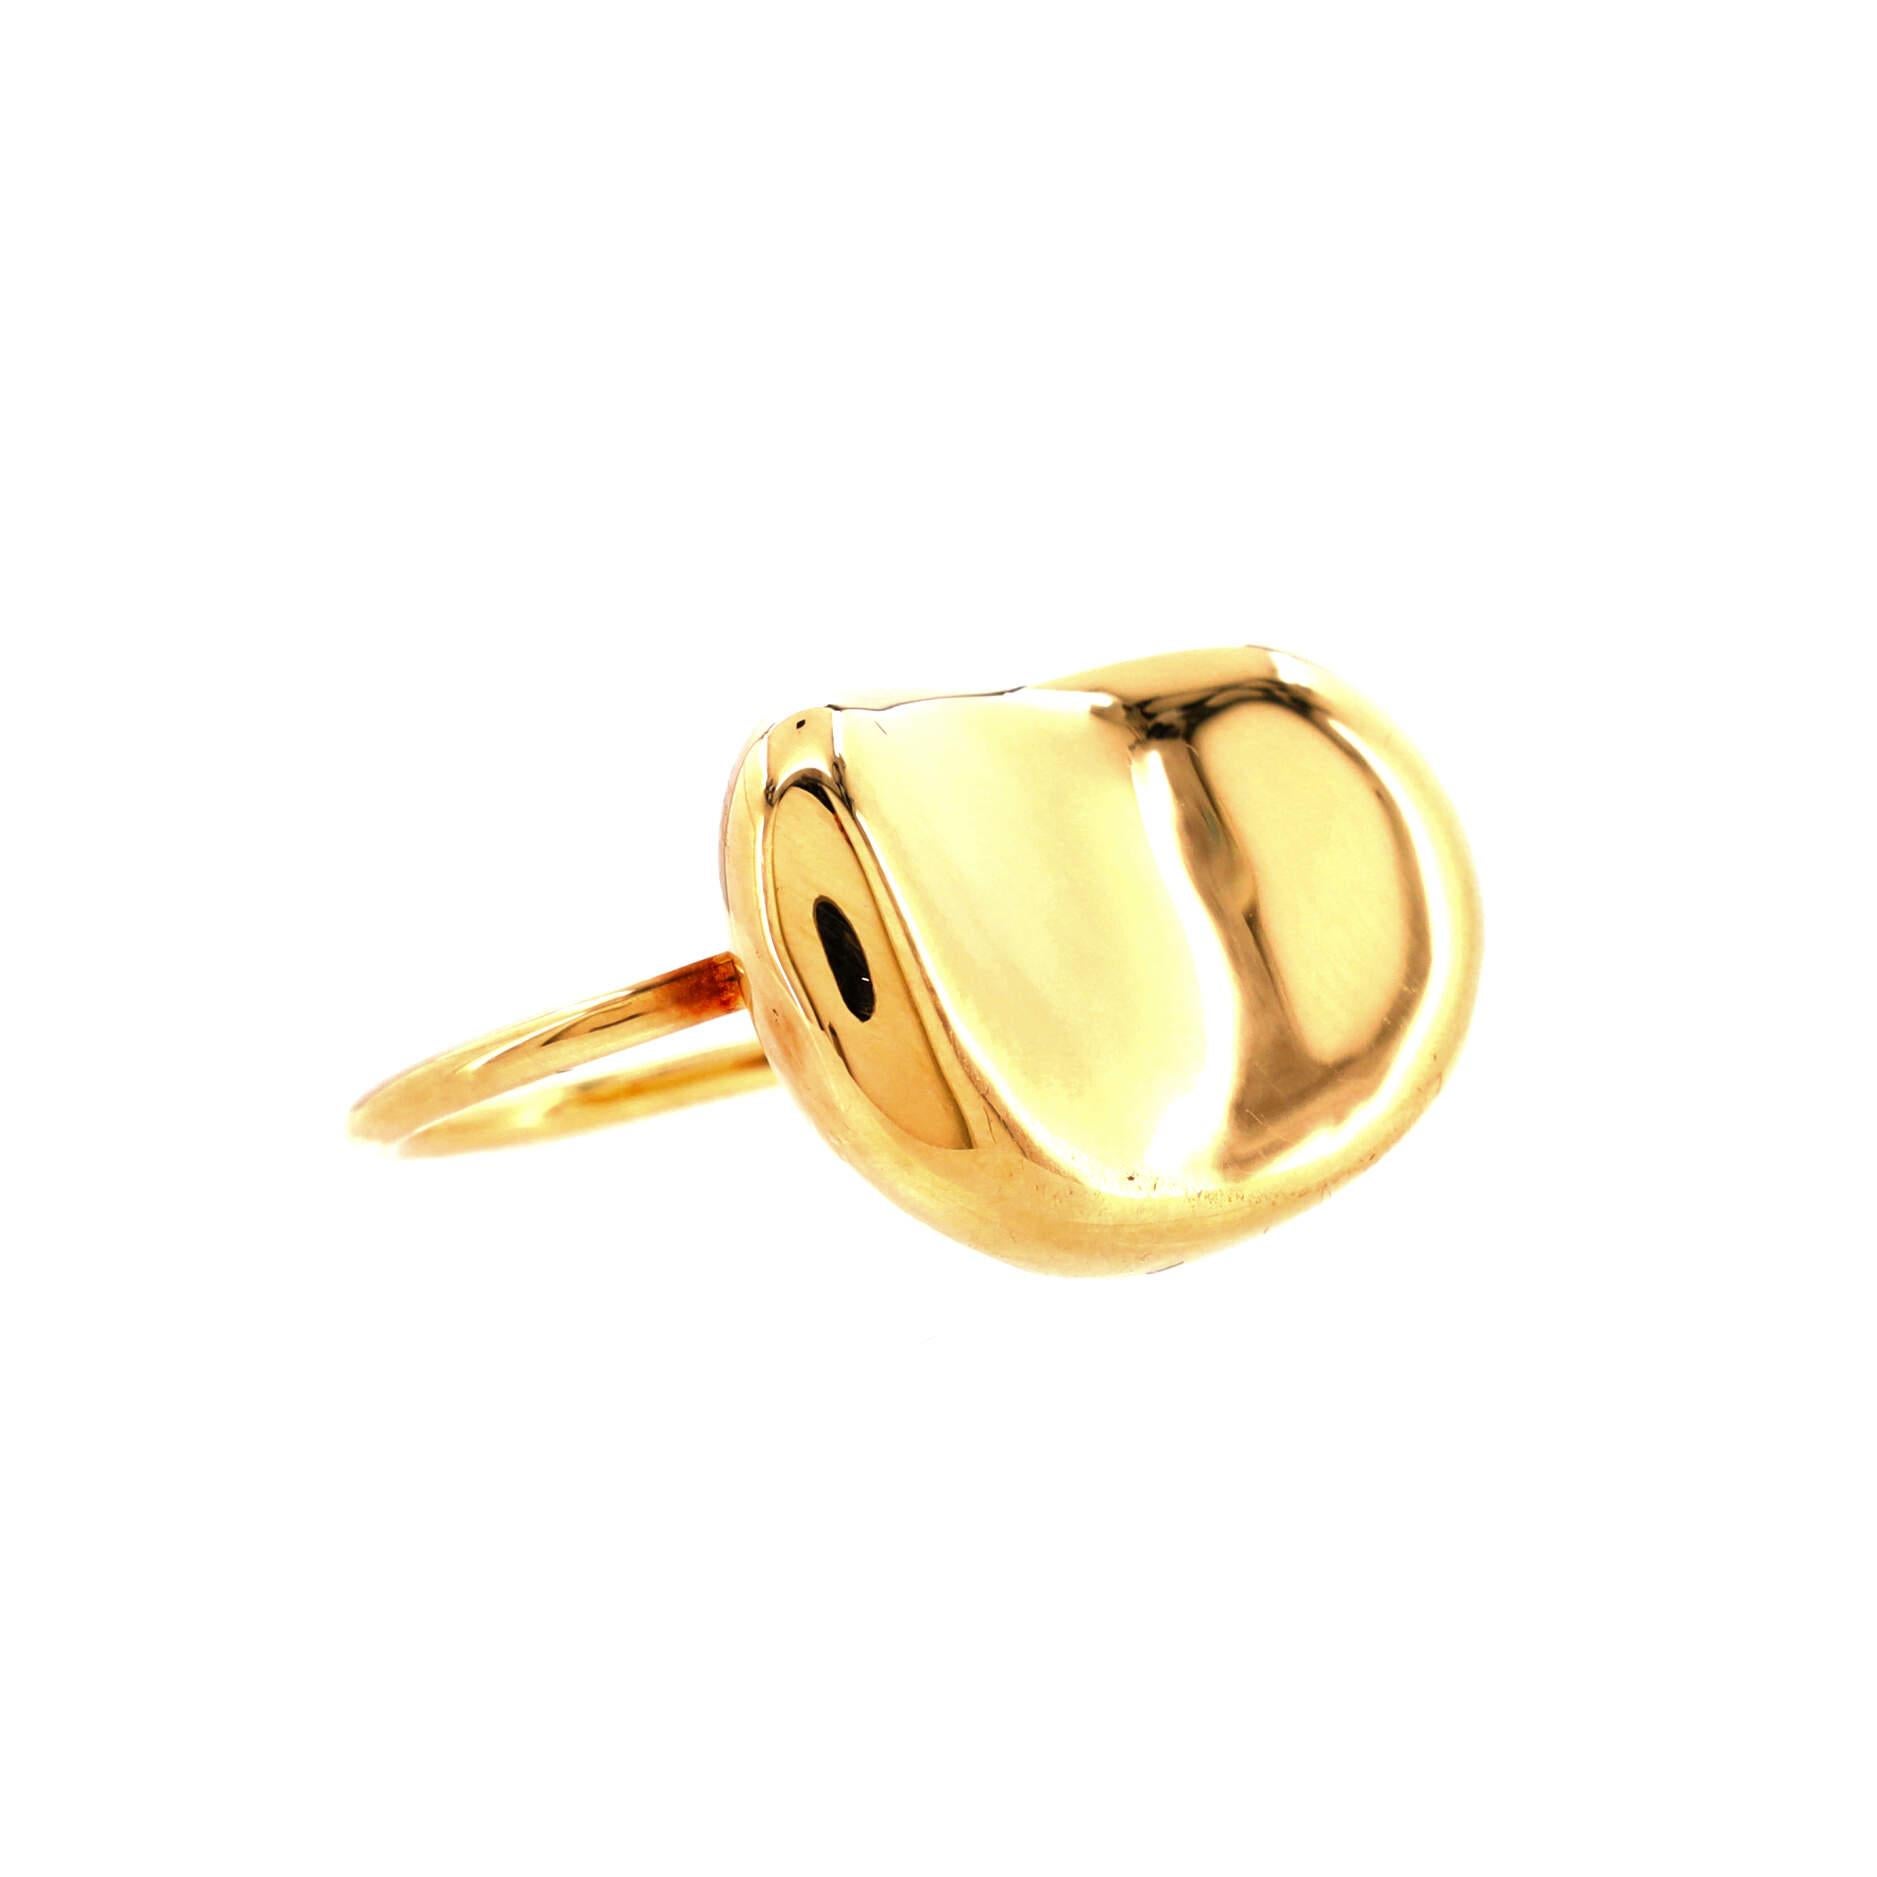 Condition: Great. Minor wear throughout.
Accessories: No Accessories
Measurements: Size: 5.5, Width: 1.50 mm
Designer: Tiffany & Co.
Model: Elsa Peretti Bean Ring 18K Yellow Gold Very Large
Exterior Color: Yellow Gold
Item Number: 185543/40